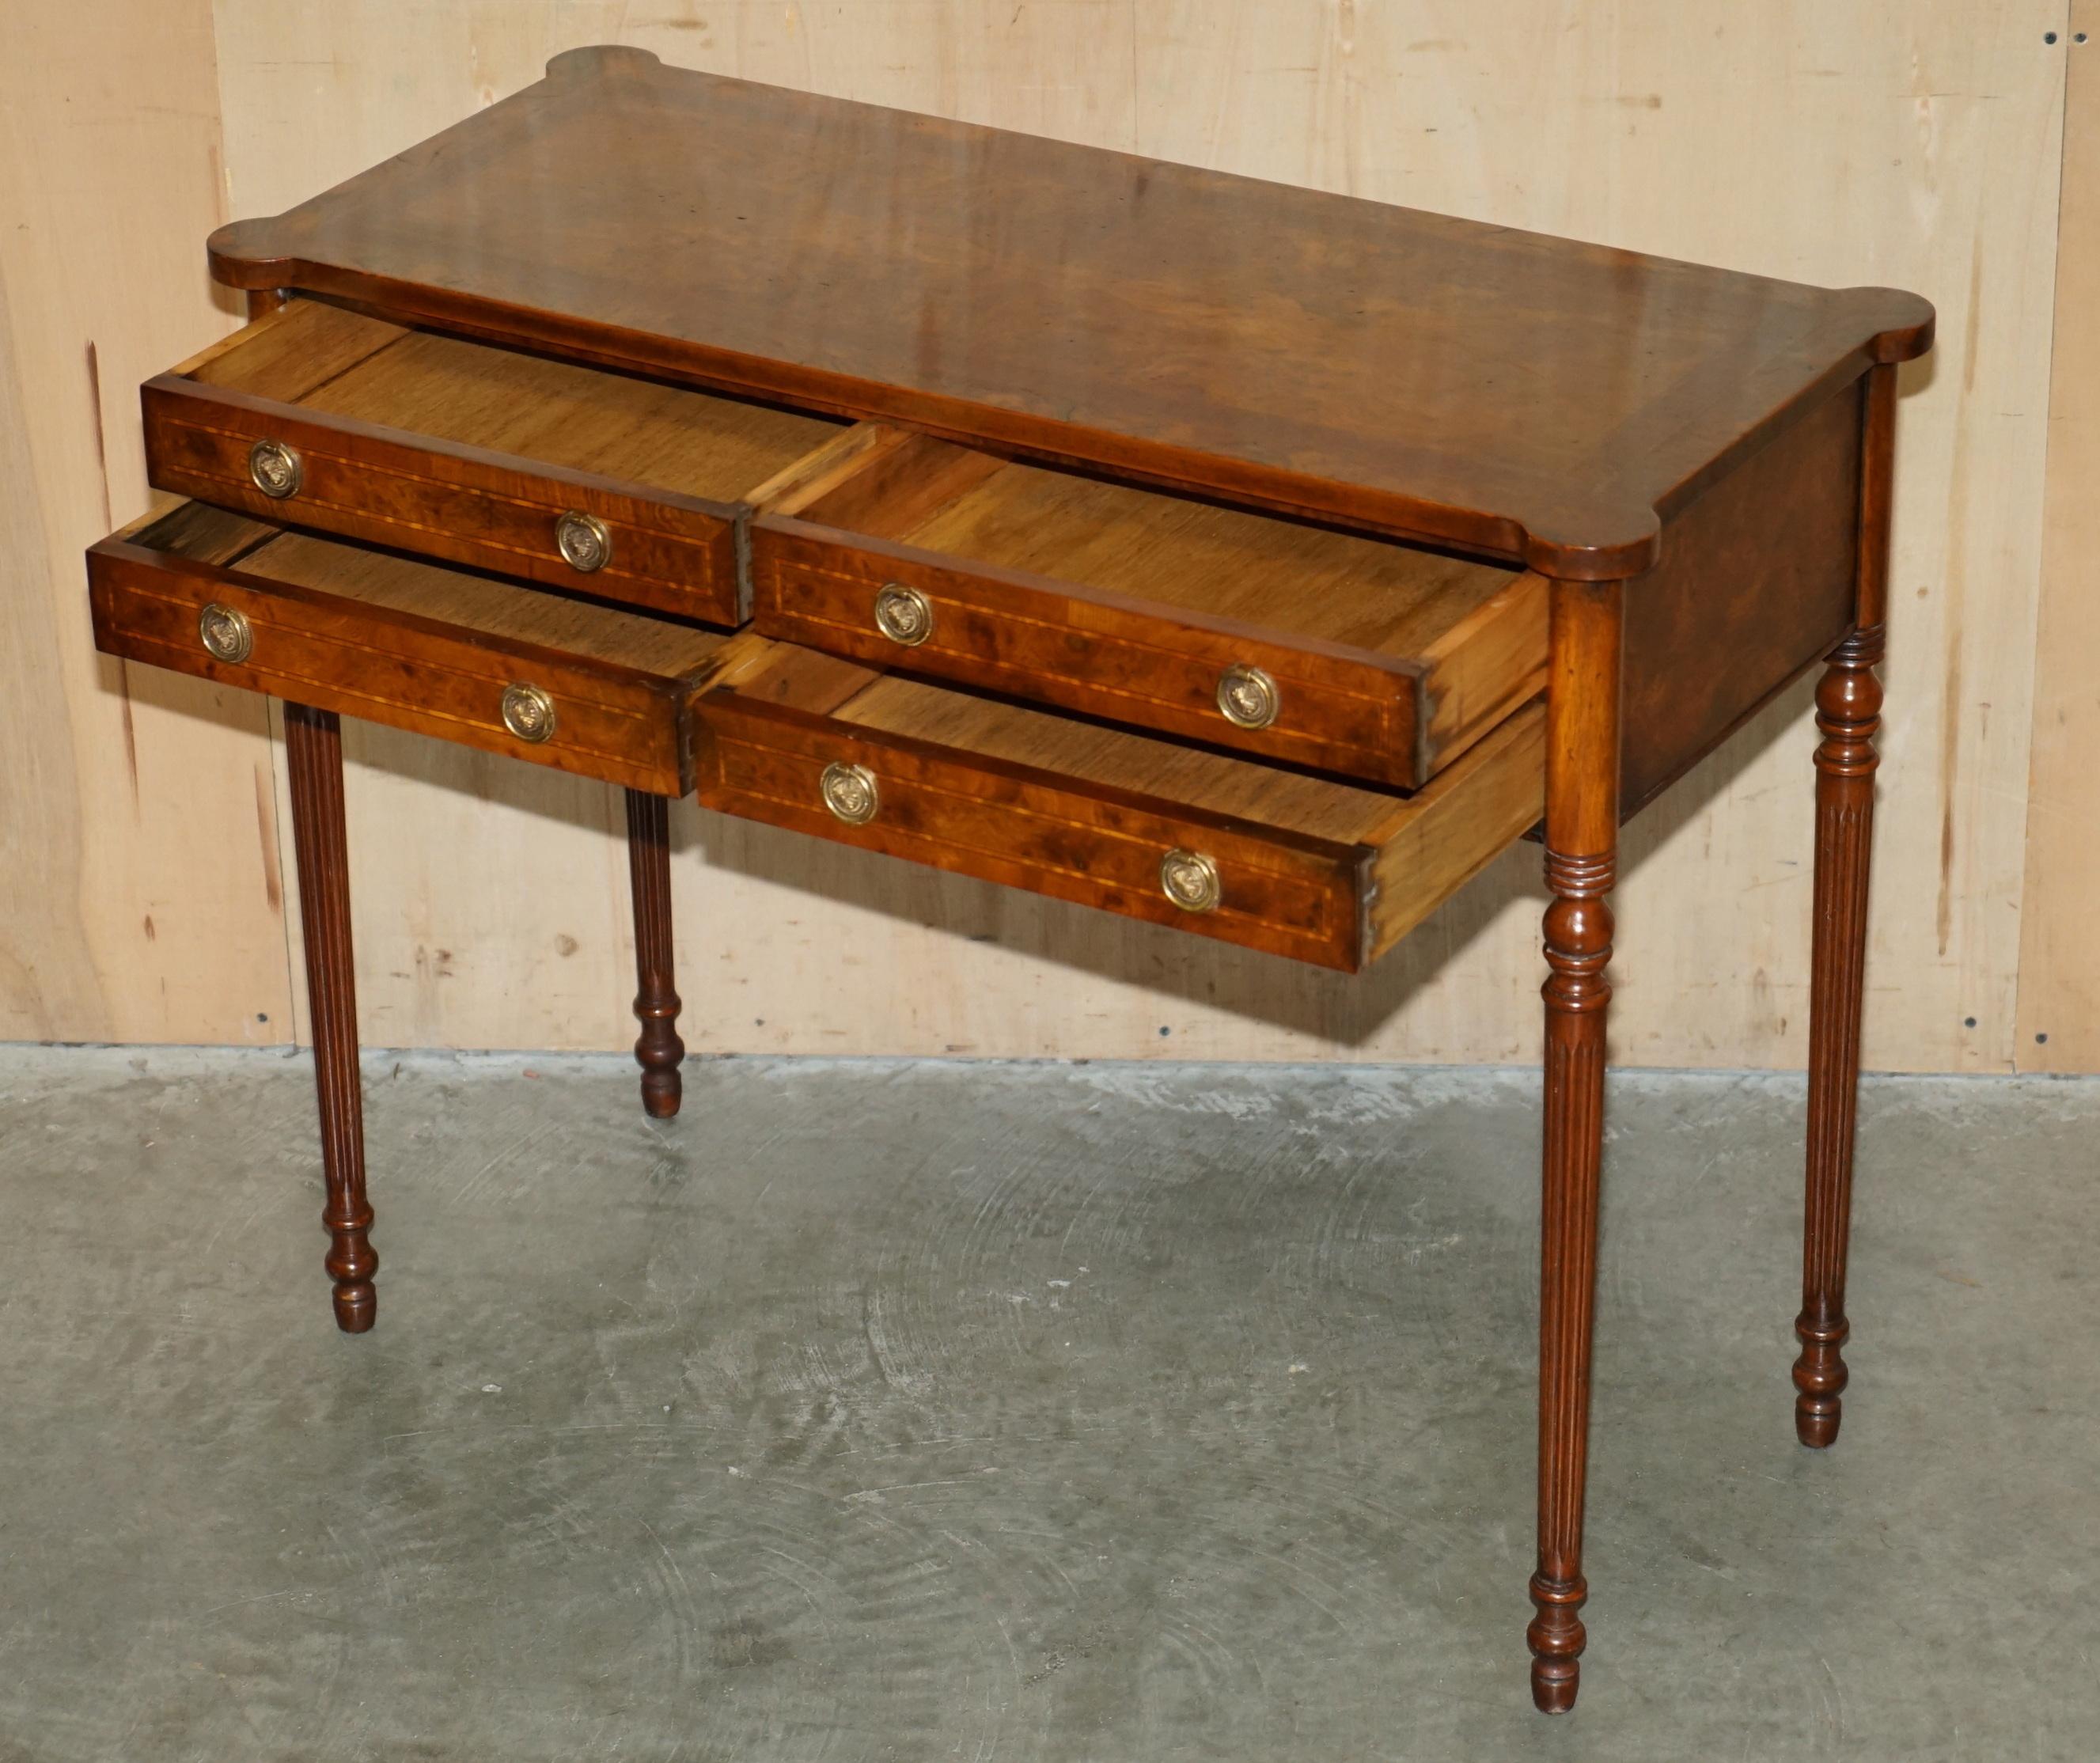 EXQUISITE CIRCA 1920 BURR ELM & SATiNWOOD FRENCH POLISHED RESTORED CONSOLE TABLE im Angebot 10